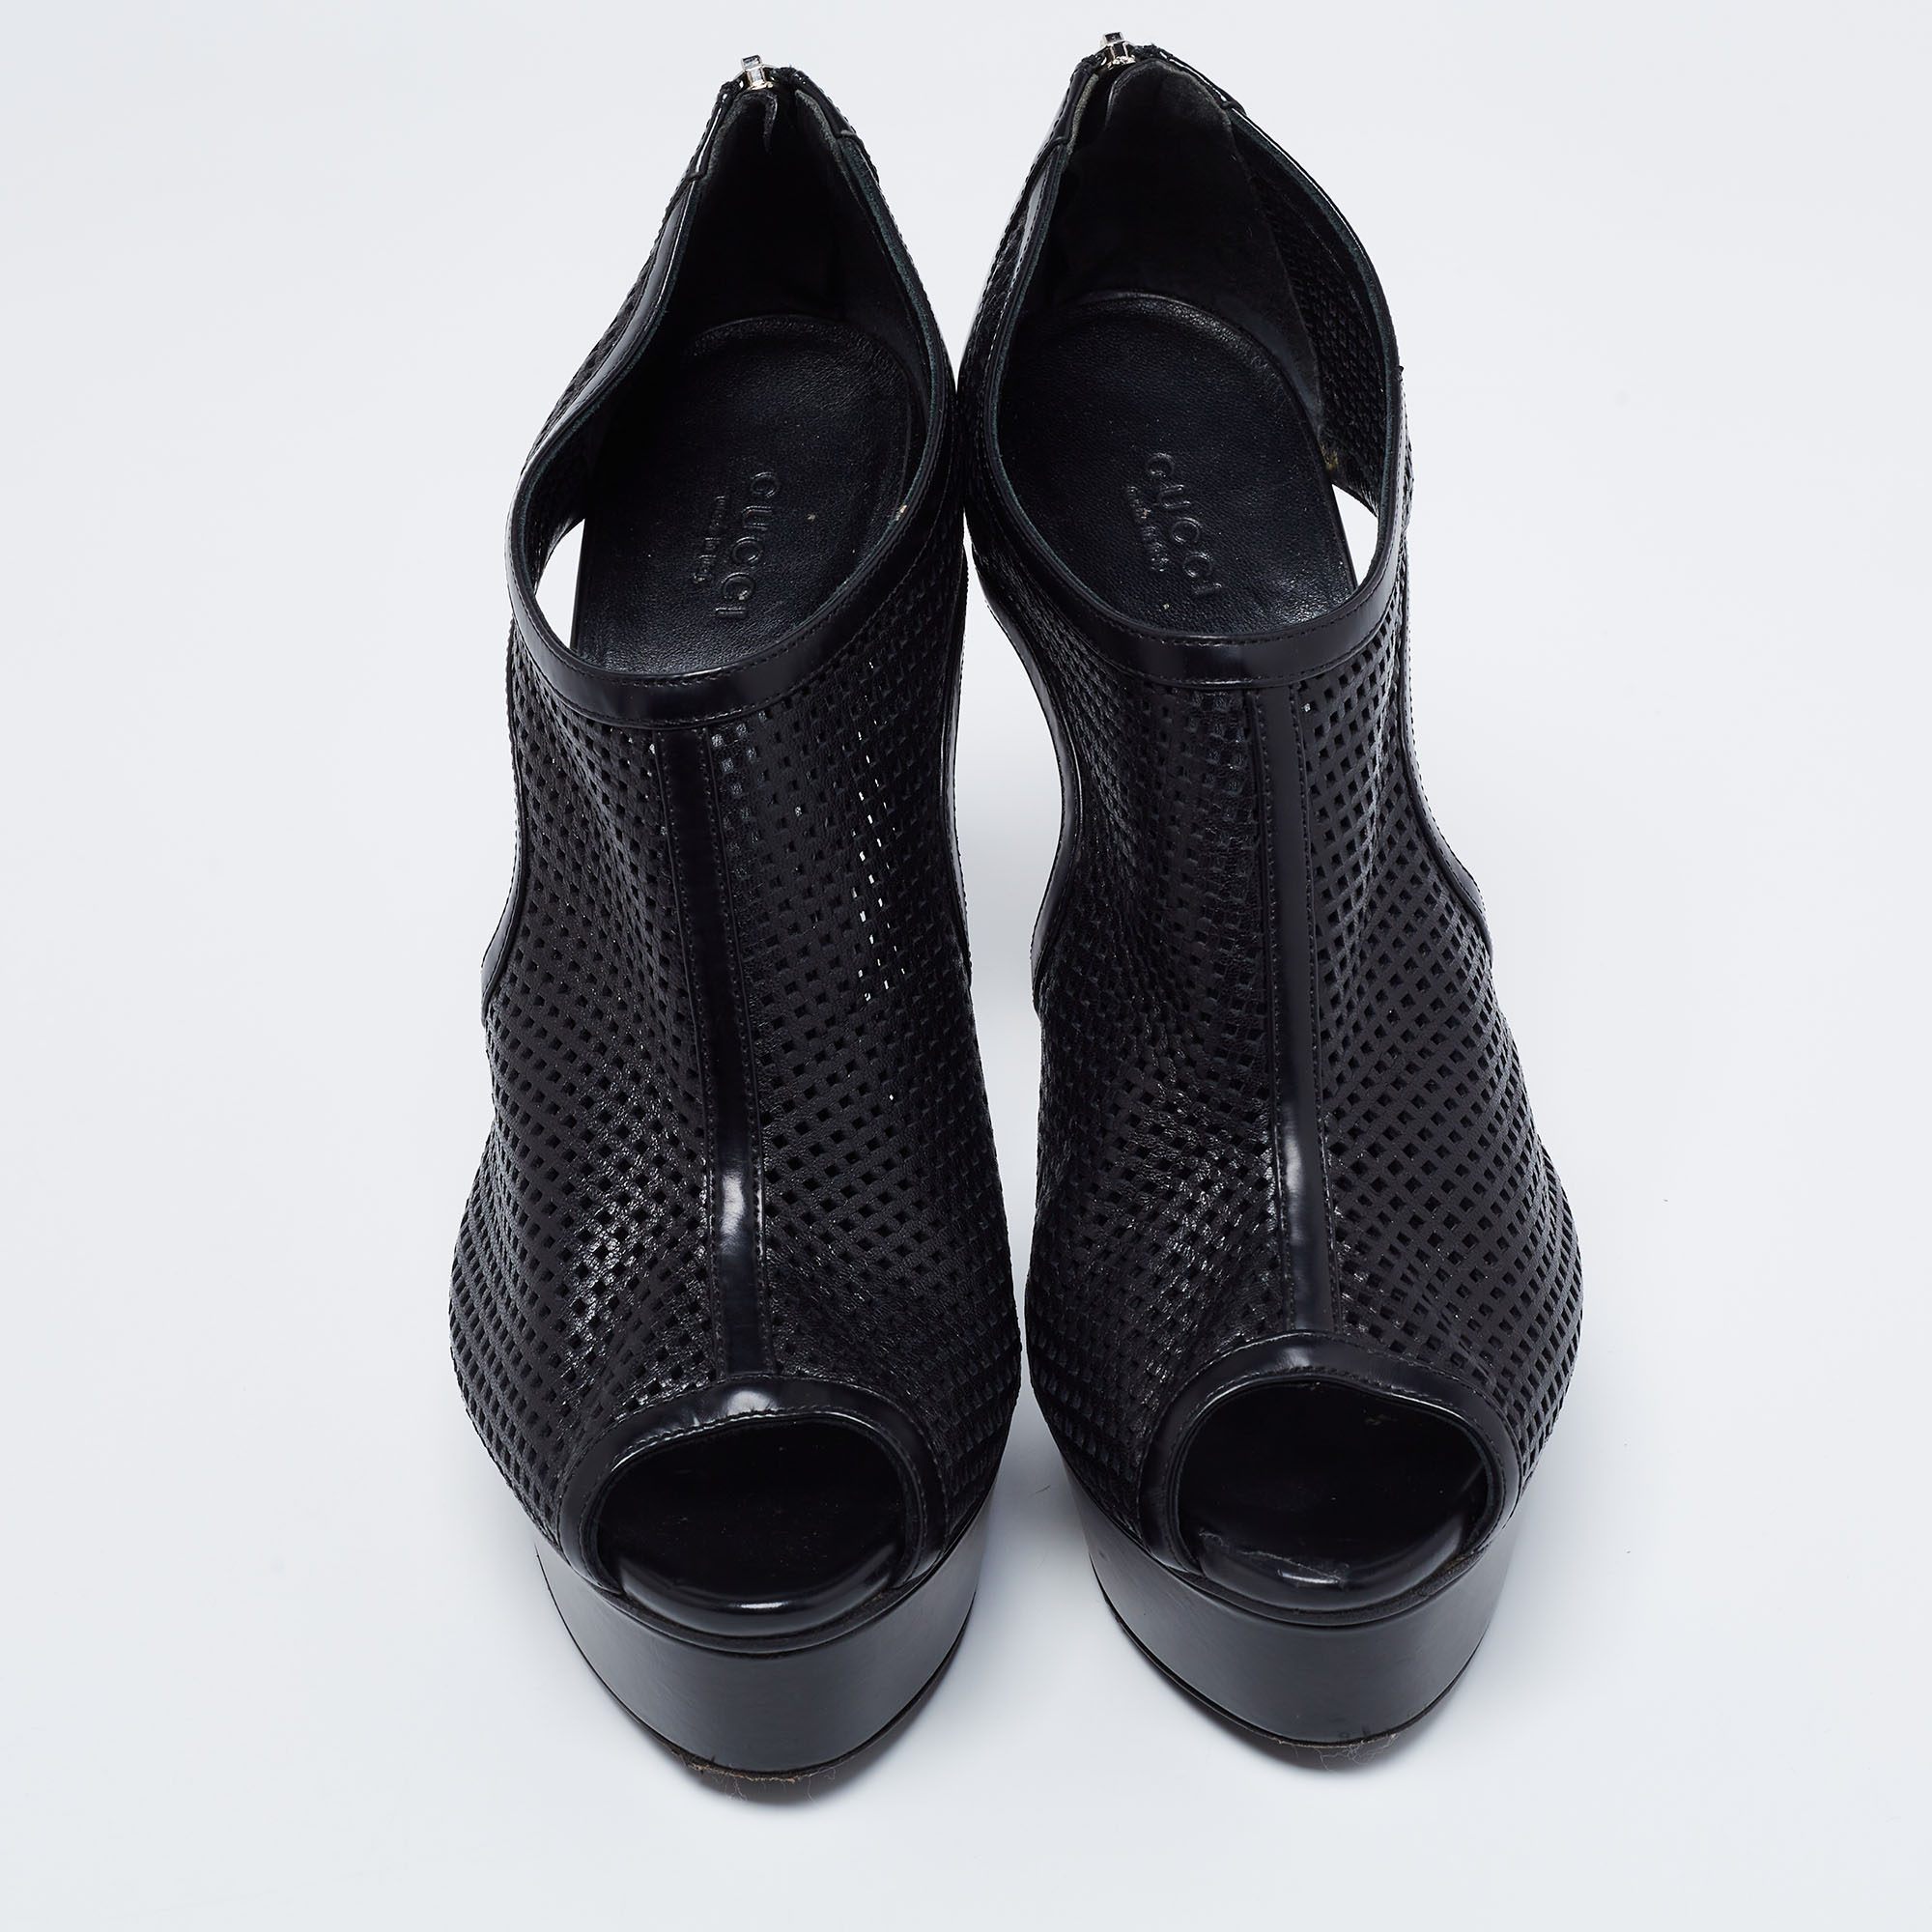 Gucci Black Perforated Leather Kim Peep-Toe Platform Ankle Booties Size 39.5